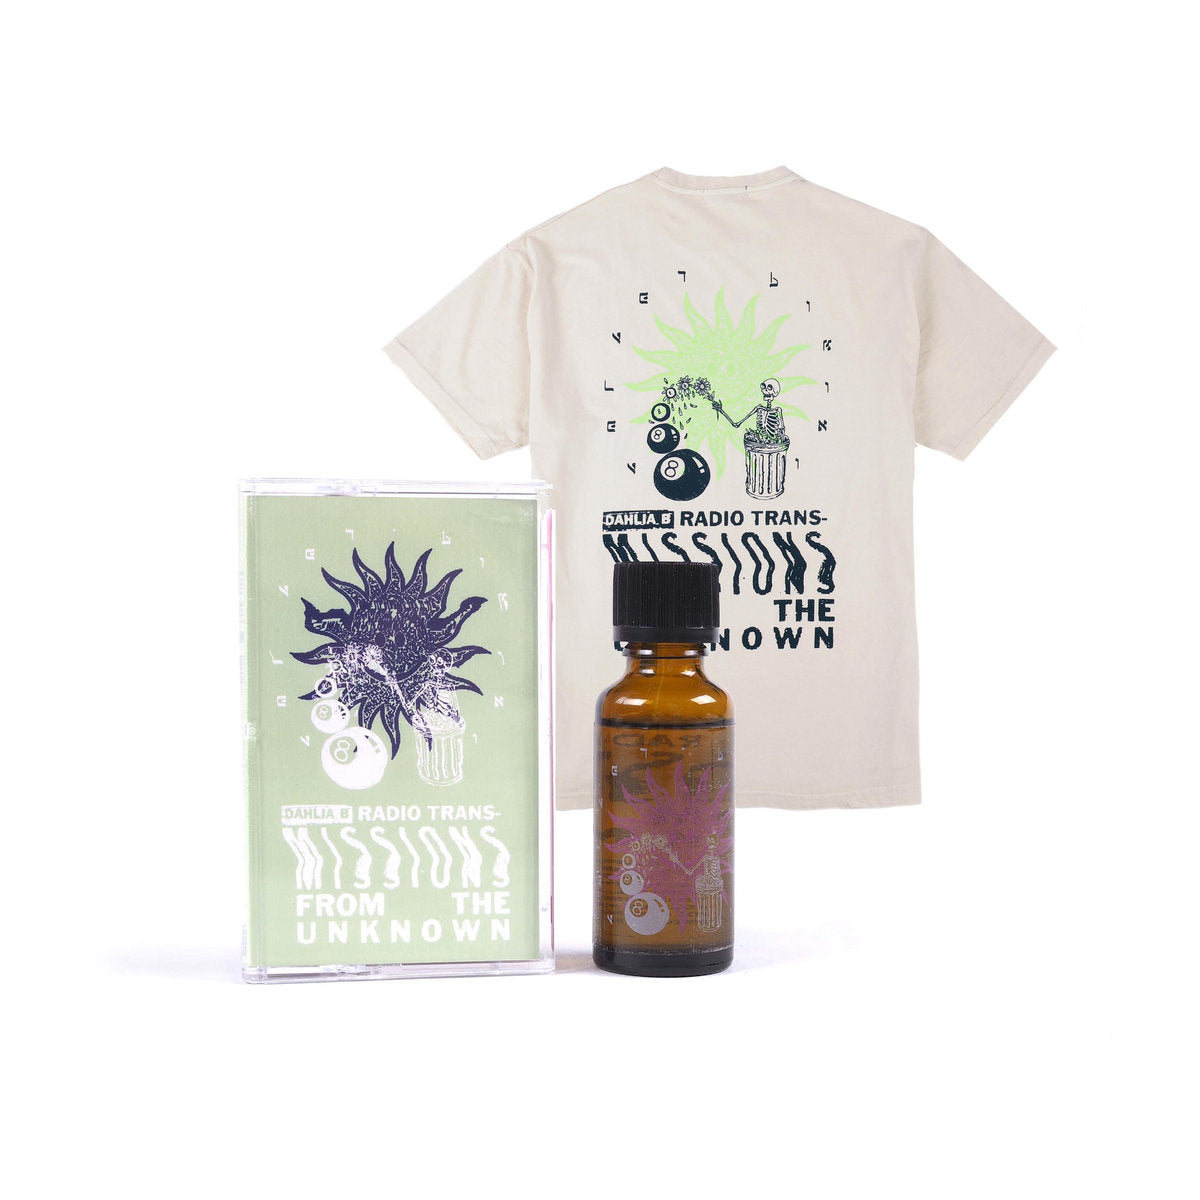 'Radio Transmissions From The Unknown' Tee, Tape, and Fragrance Bundle